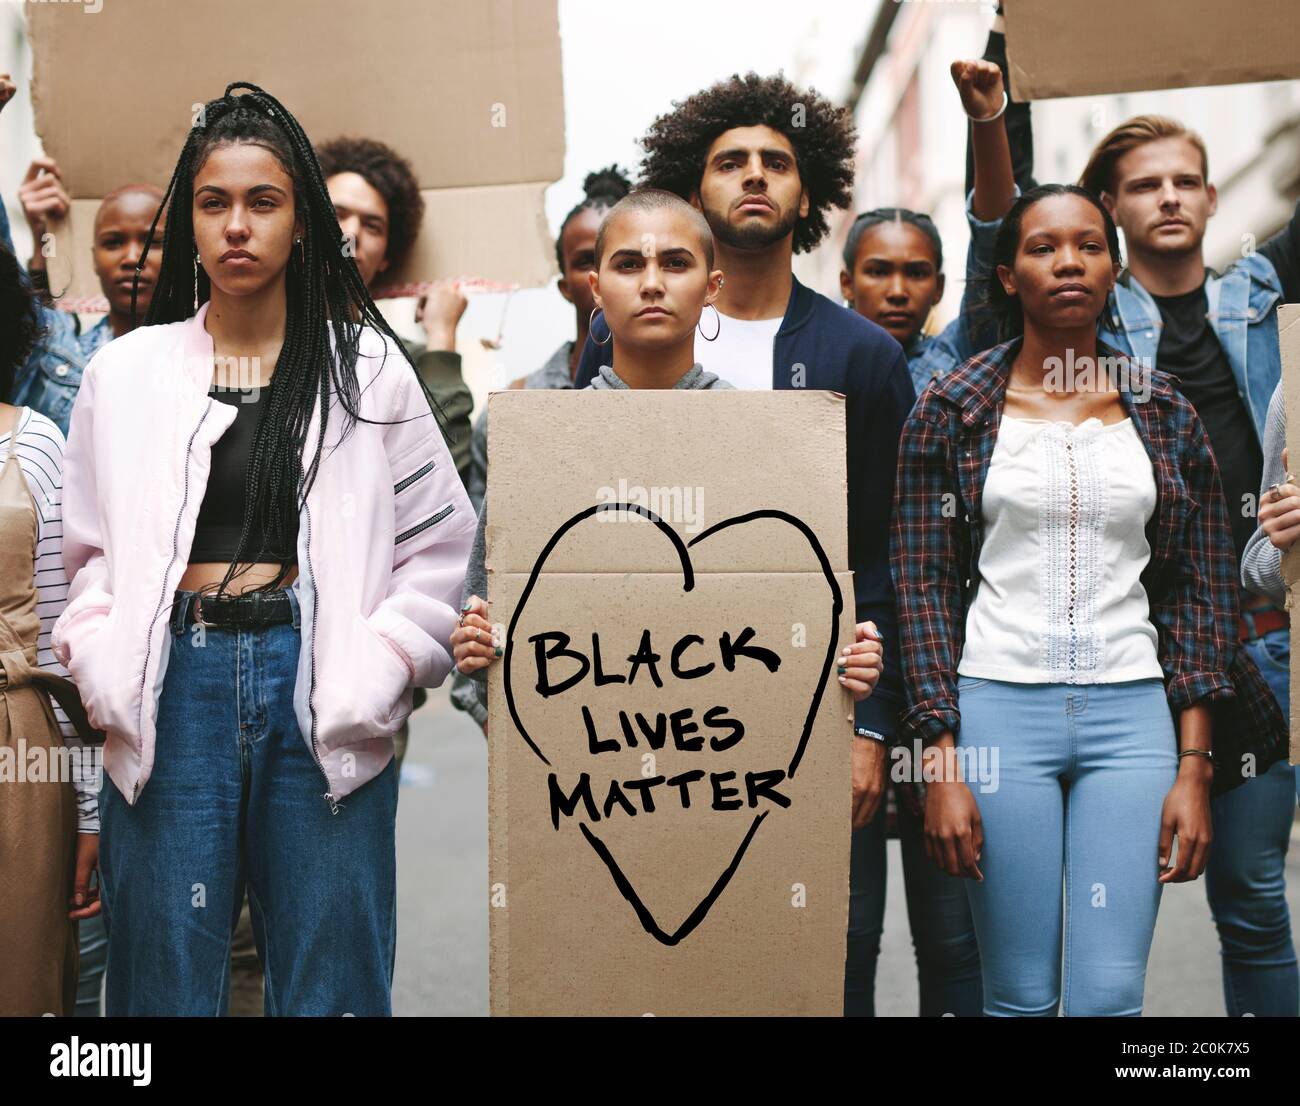 Black lives matter protest. Young people protesting to show that they stand against racism. Stock Photo